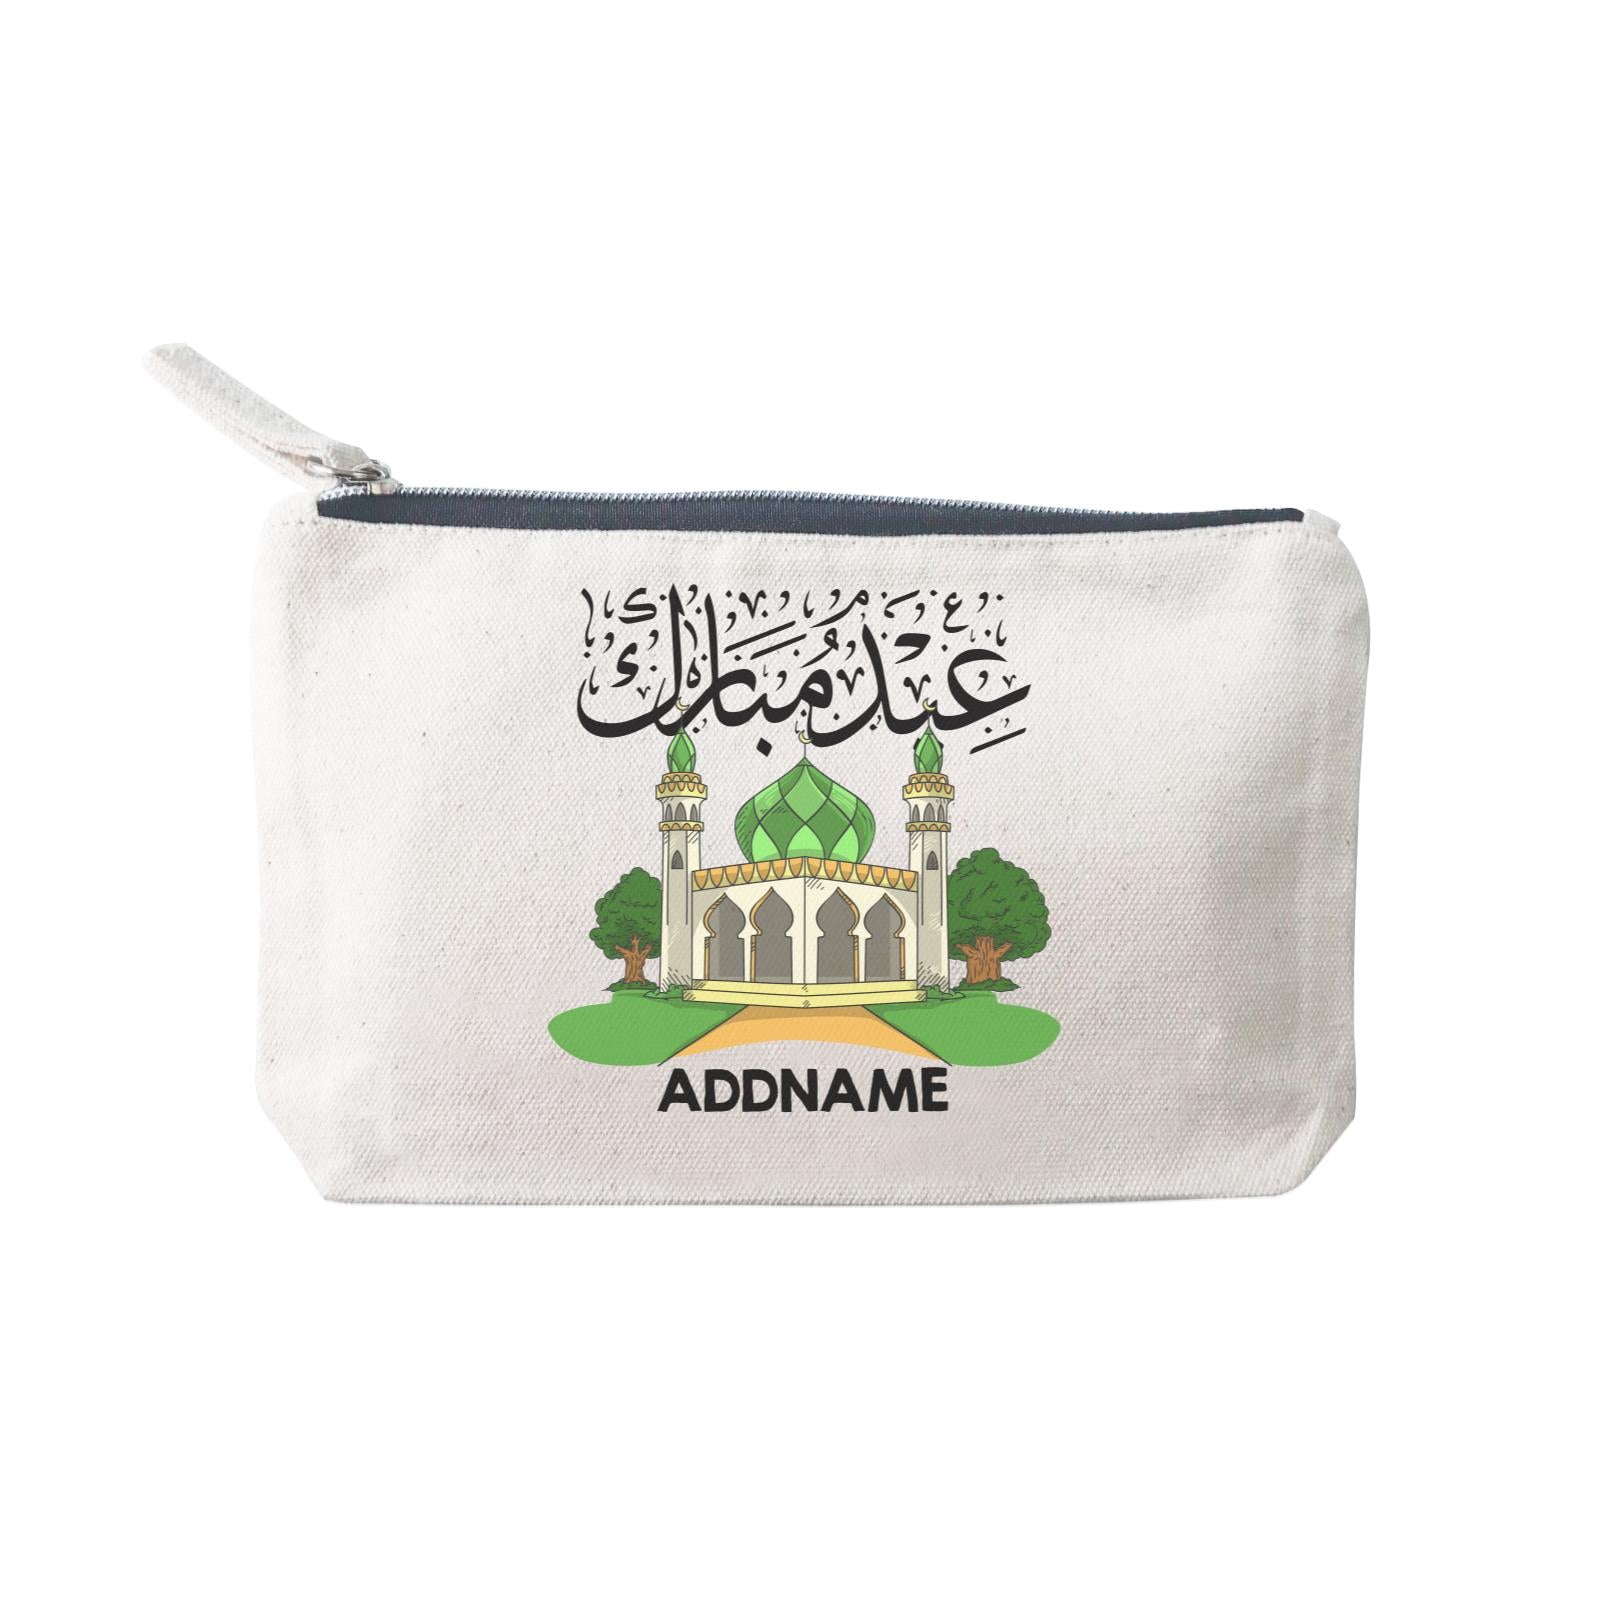 Mosque 2 Addname Mini Accessories Stationery Pouch 2